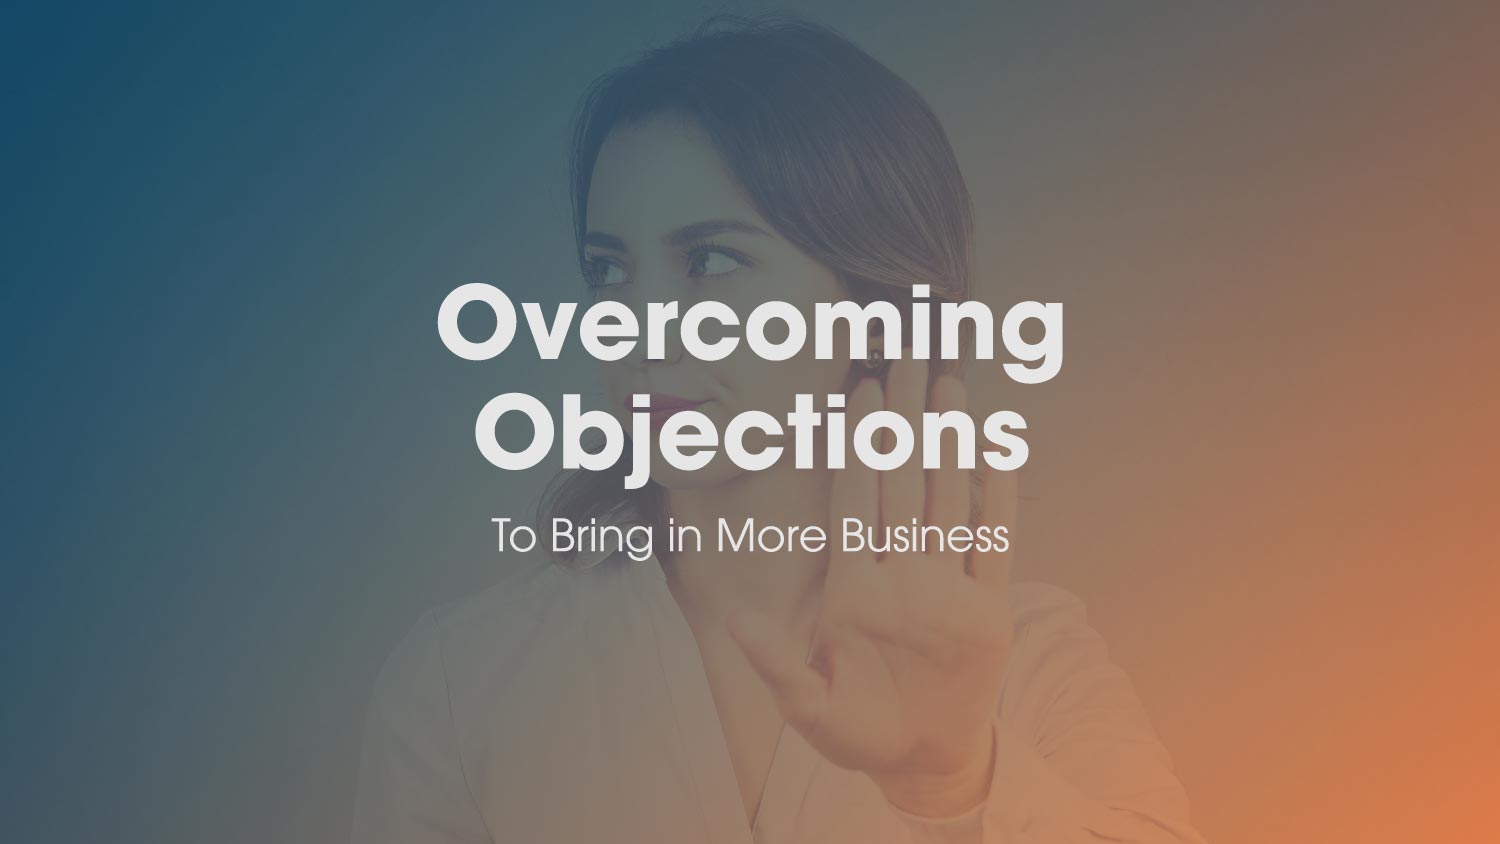 Overcoming Objections to Bring in New Business